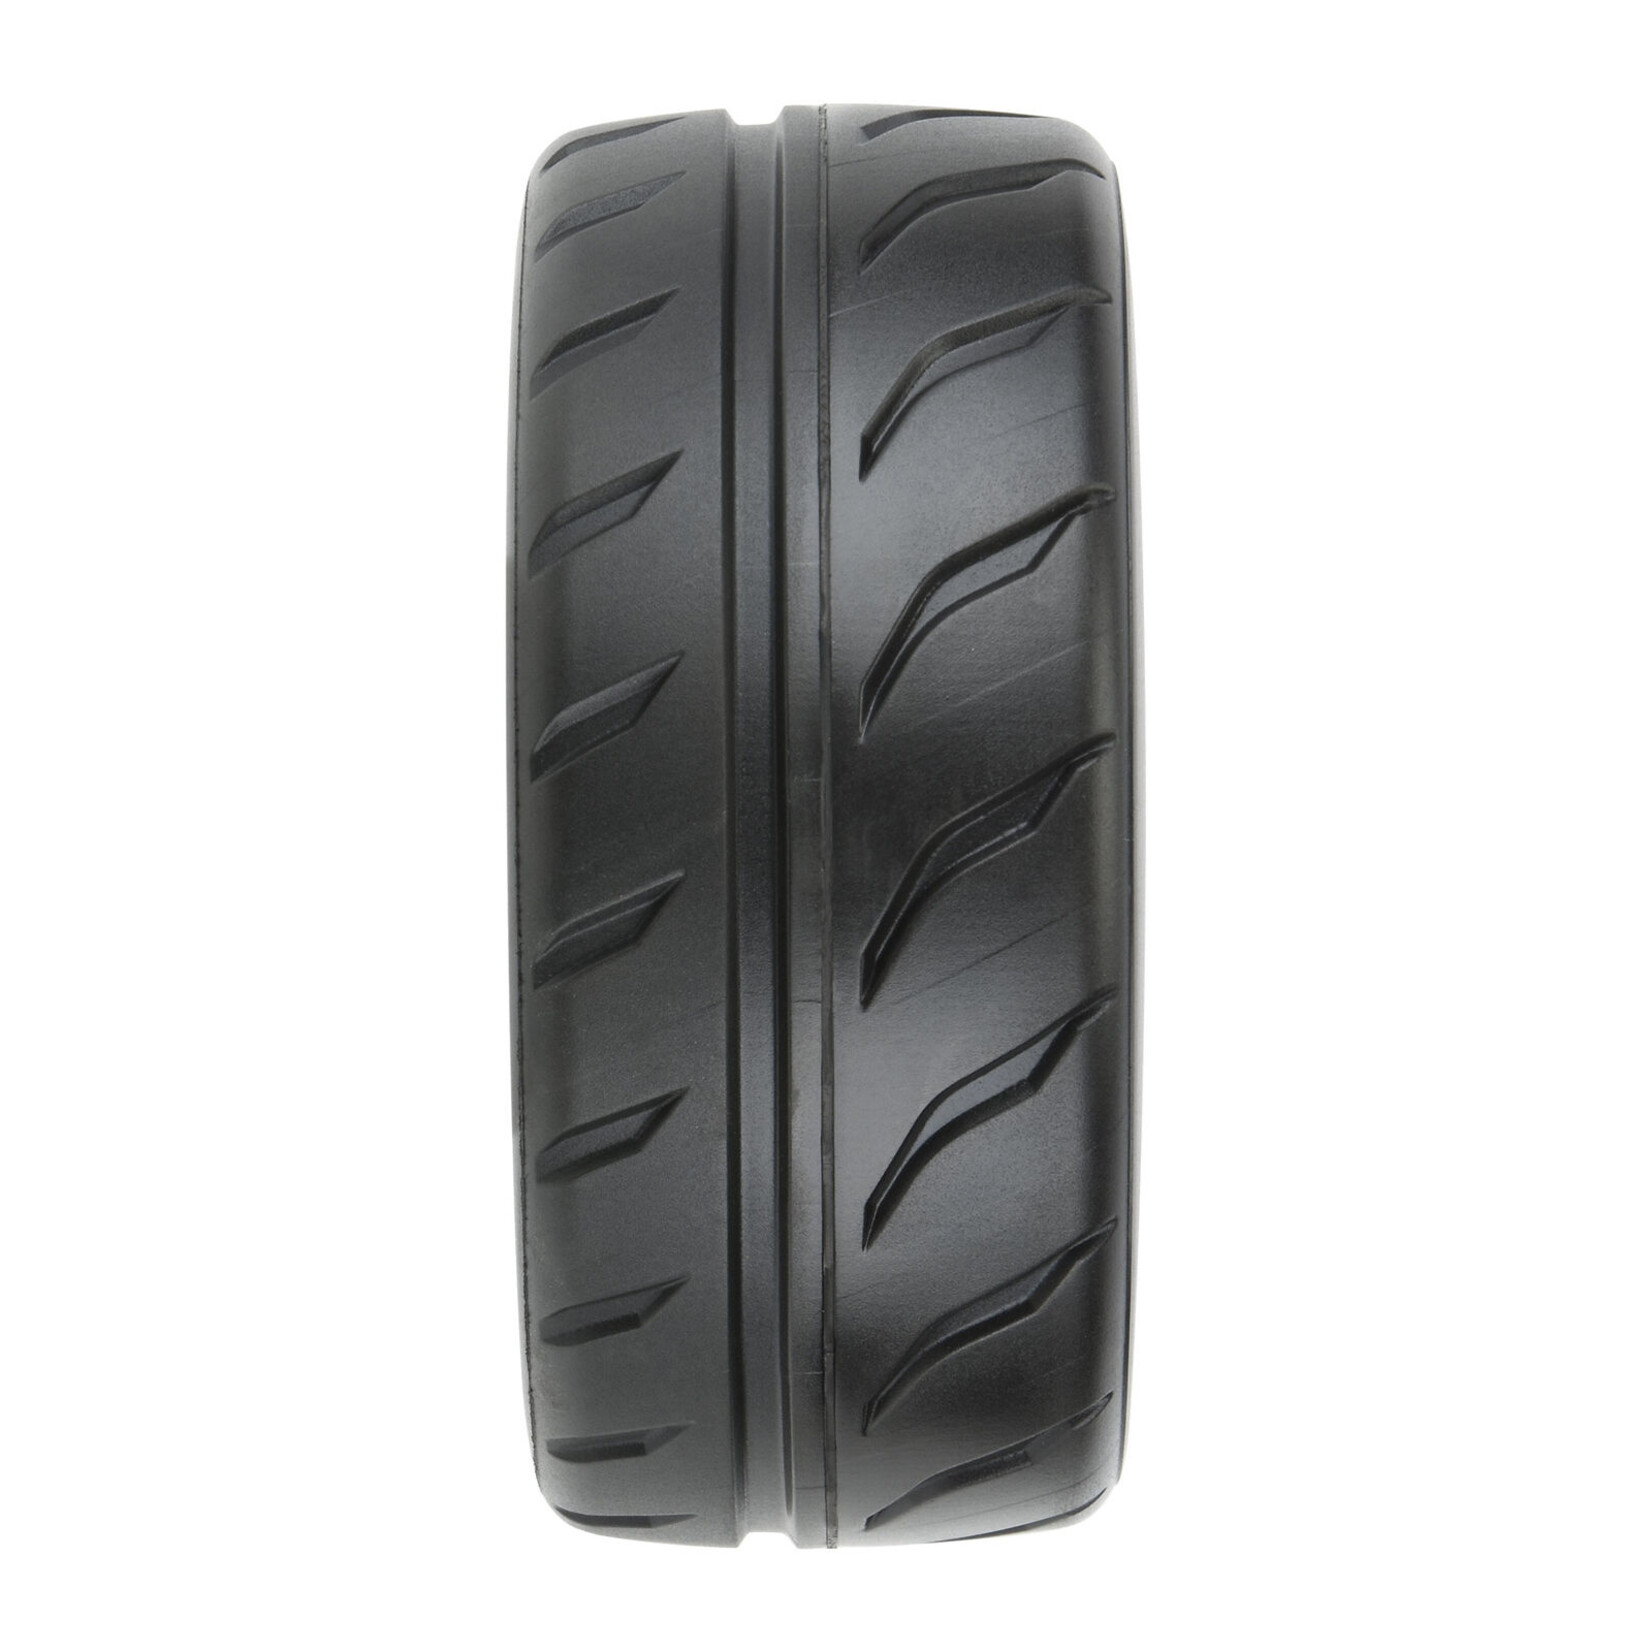 Pro-Line Pro-Line 1/7 Toyo Proxes 2.9" Belted Tires Pre-Mounted w/17mm Spectre Wheels (Gunmetal) #10199-11